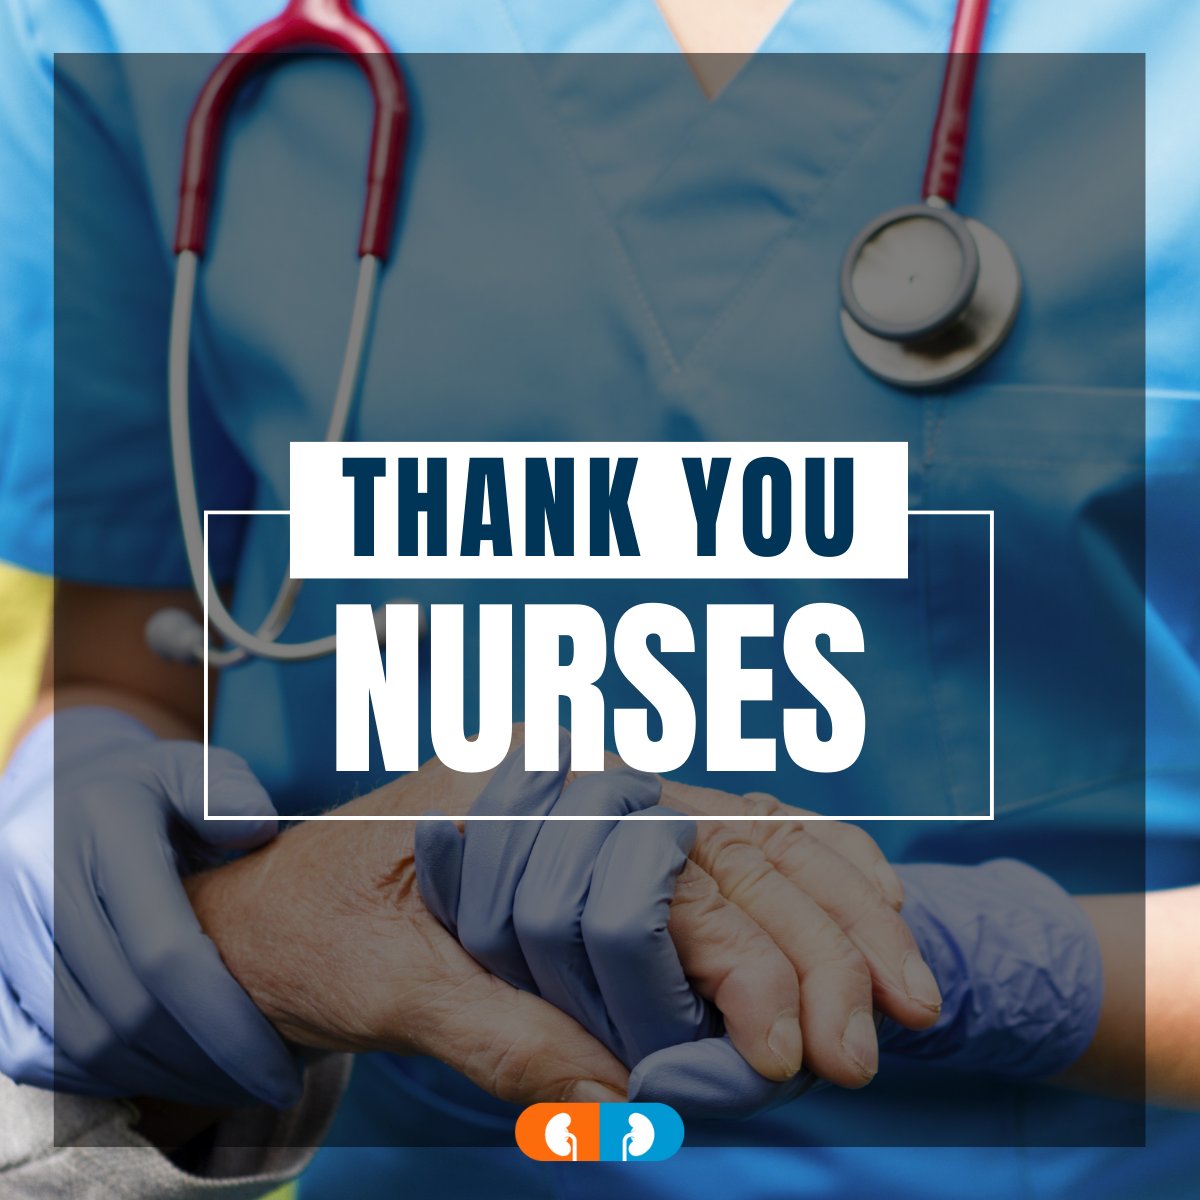 Happy Nurses Week to the incredible nurses who work tirelessly to support kidney patients and their families every day. Your dedication and compassion make a world of difference. Thank you for all that you do! #NursesWeek #CKD #MedTwitter